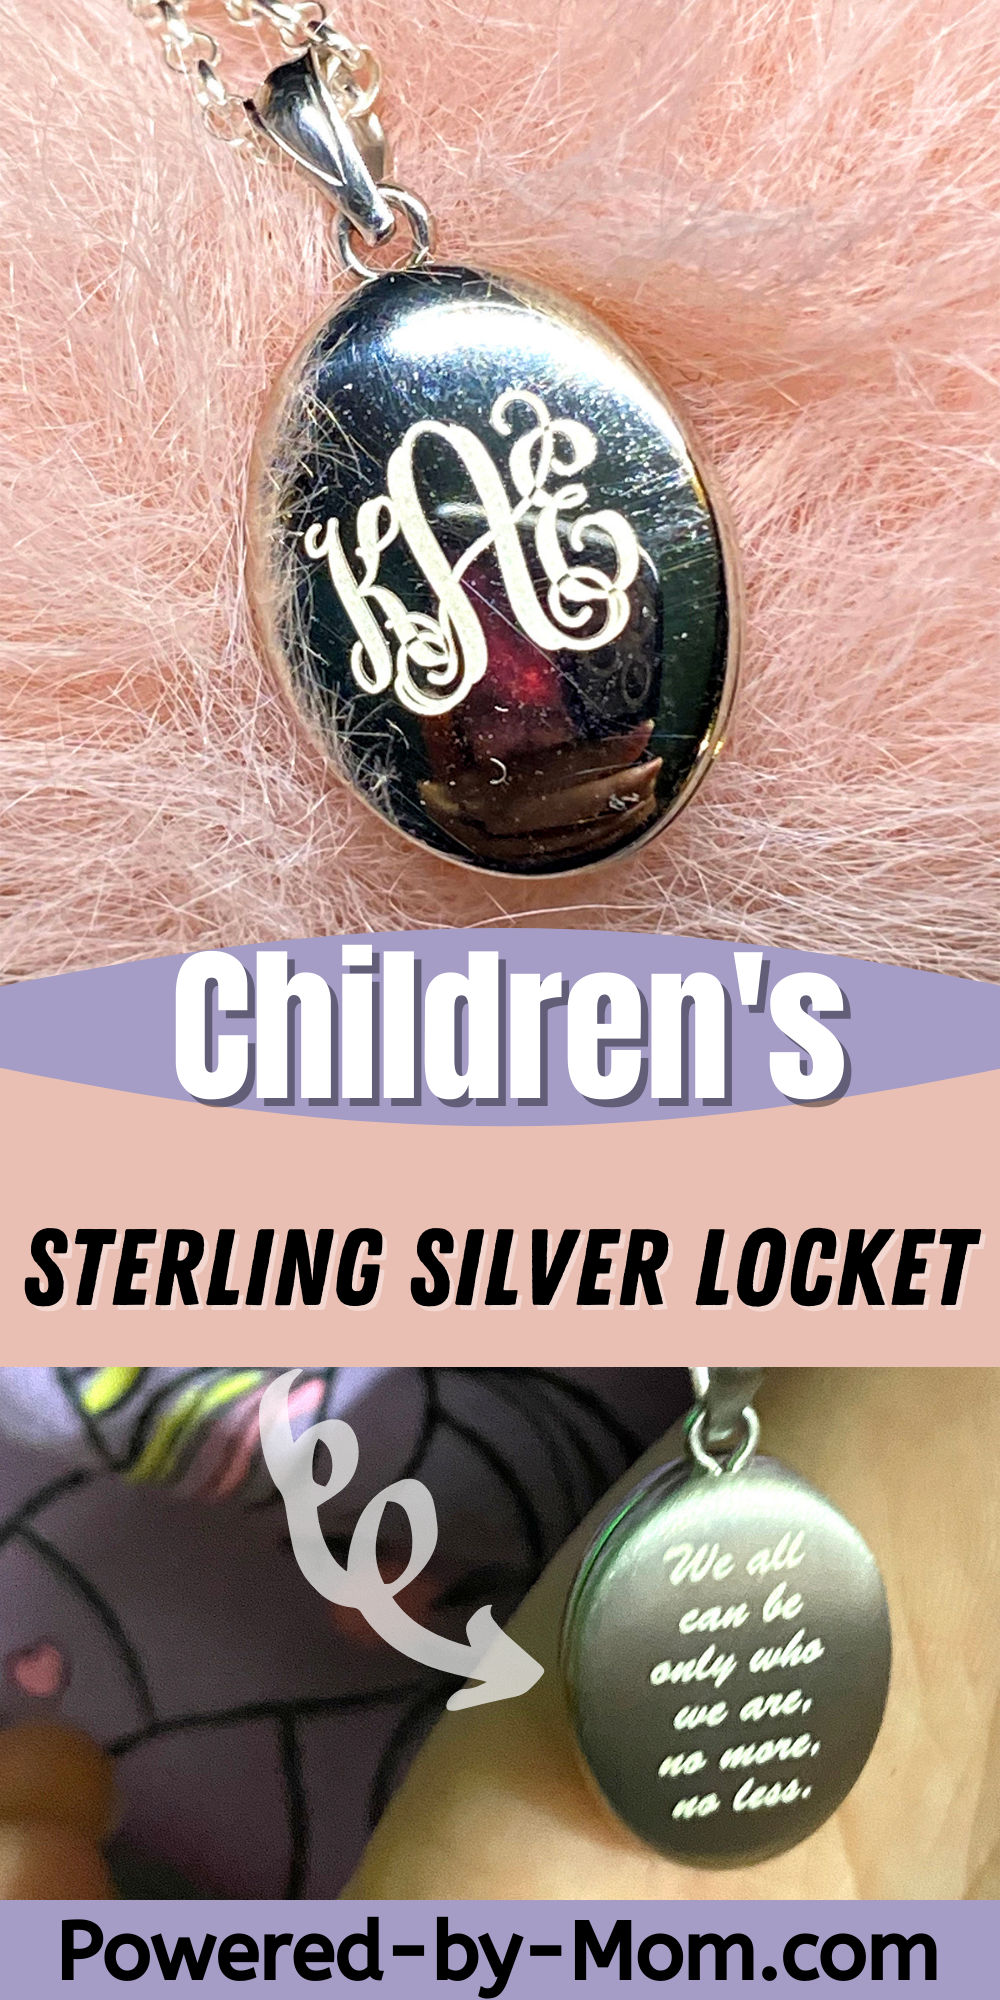 Customize this children's locket to create lasting memories and a treasured possession for any loved one. The photos will never fade.